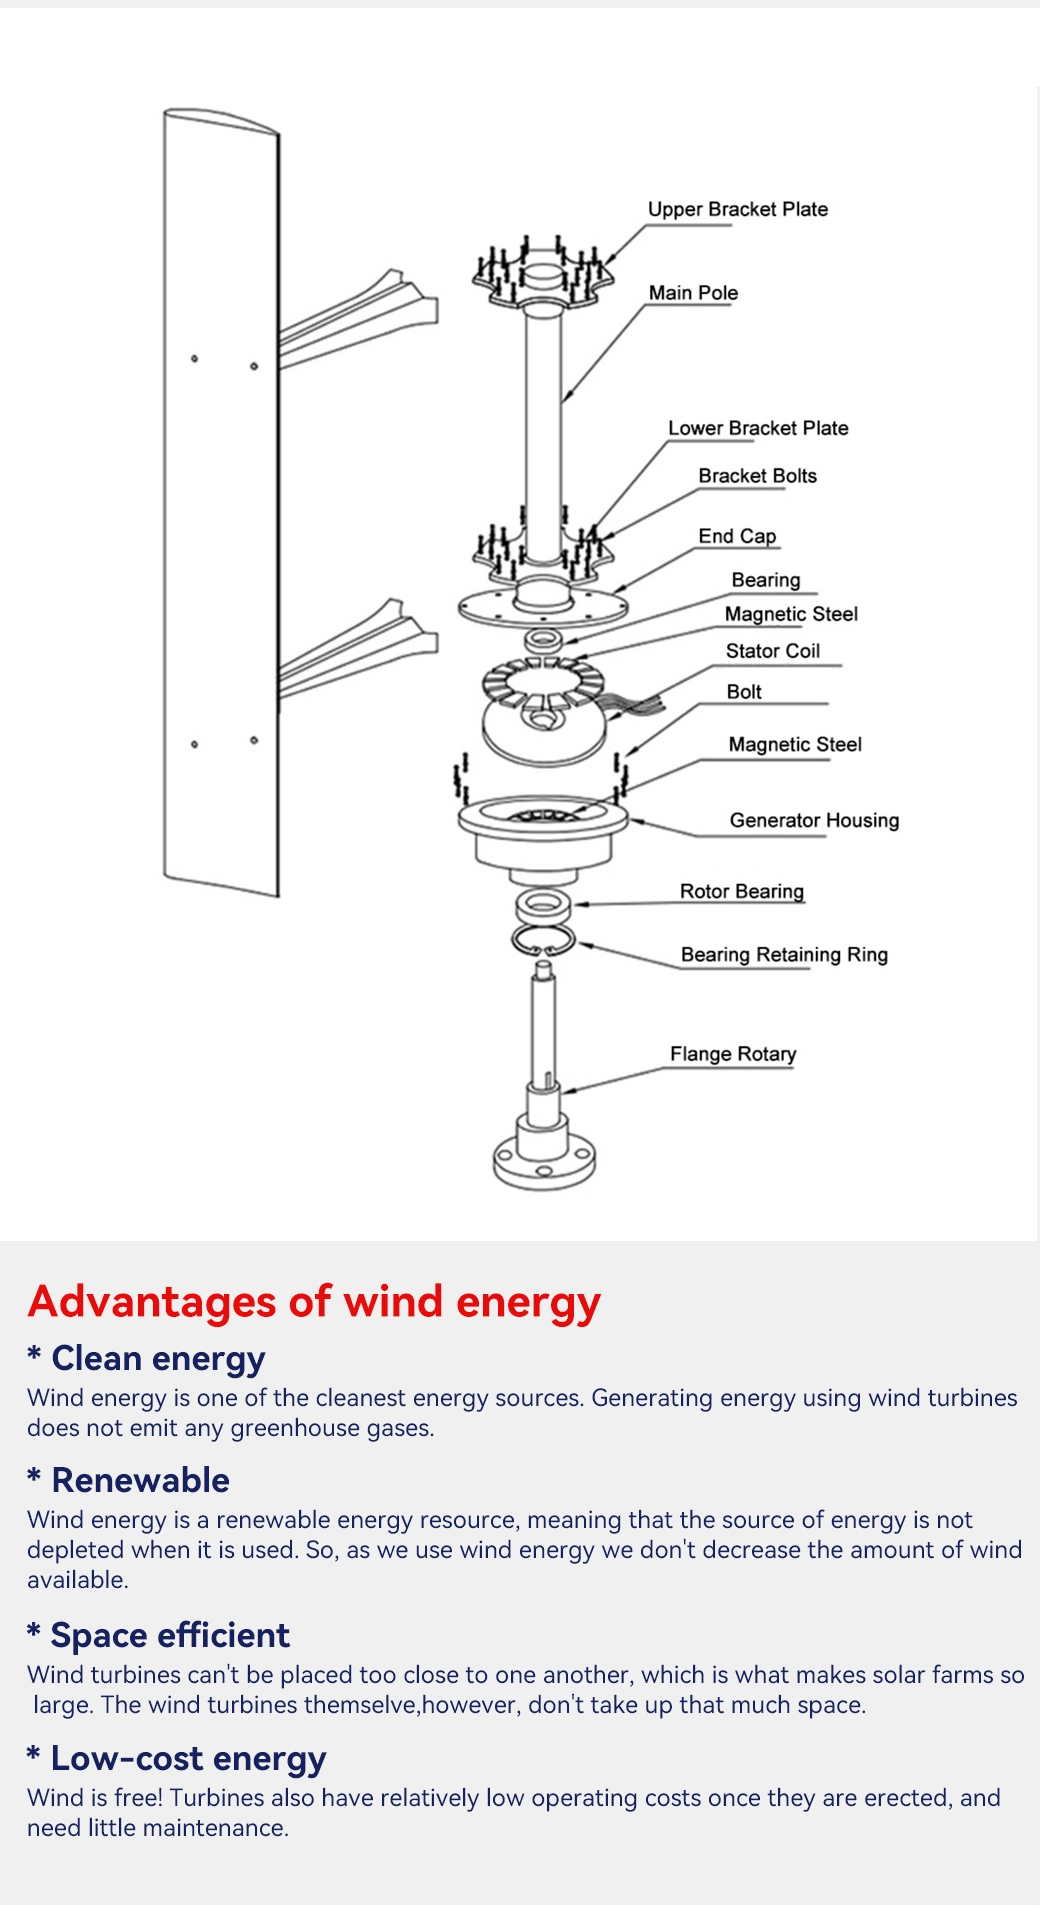 Vertical Windmill Turbine 5kw 10kw Wind Power Best Price Generator for Home Use and Factory Use